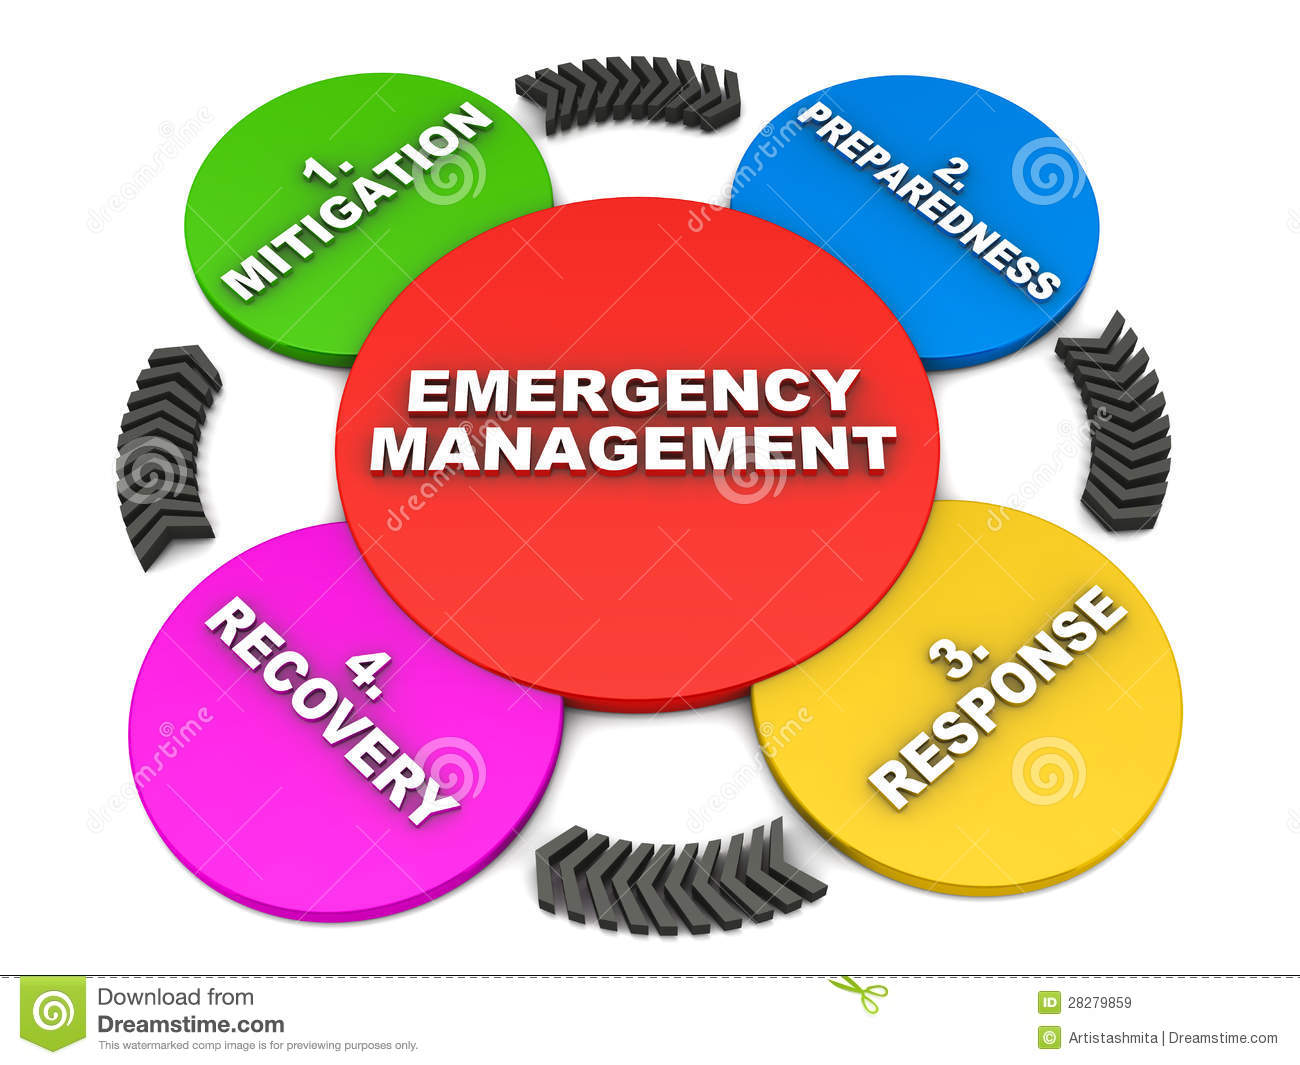 Preparedness Response And Recovery Phases Of Emergency Planning